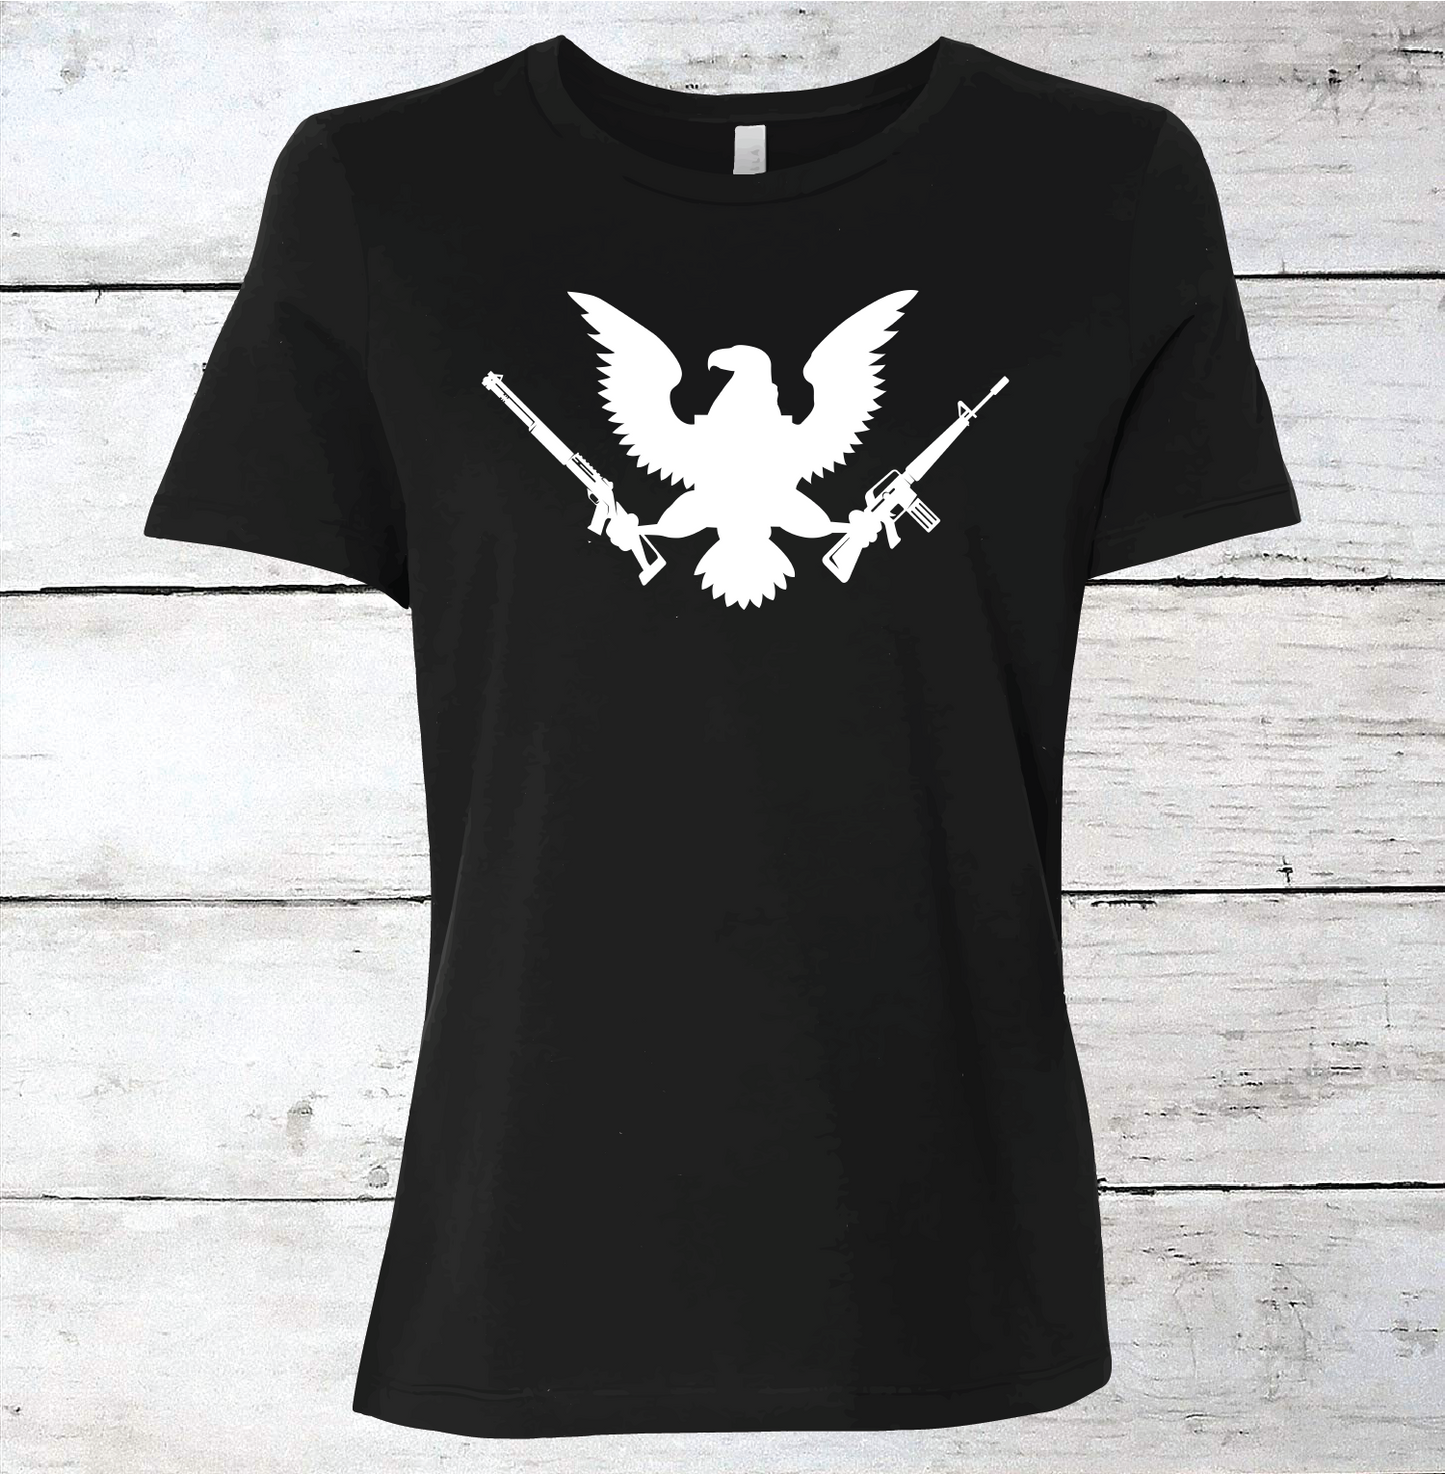 American Eagle with Rifles T-Shirt